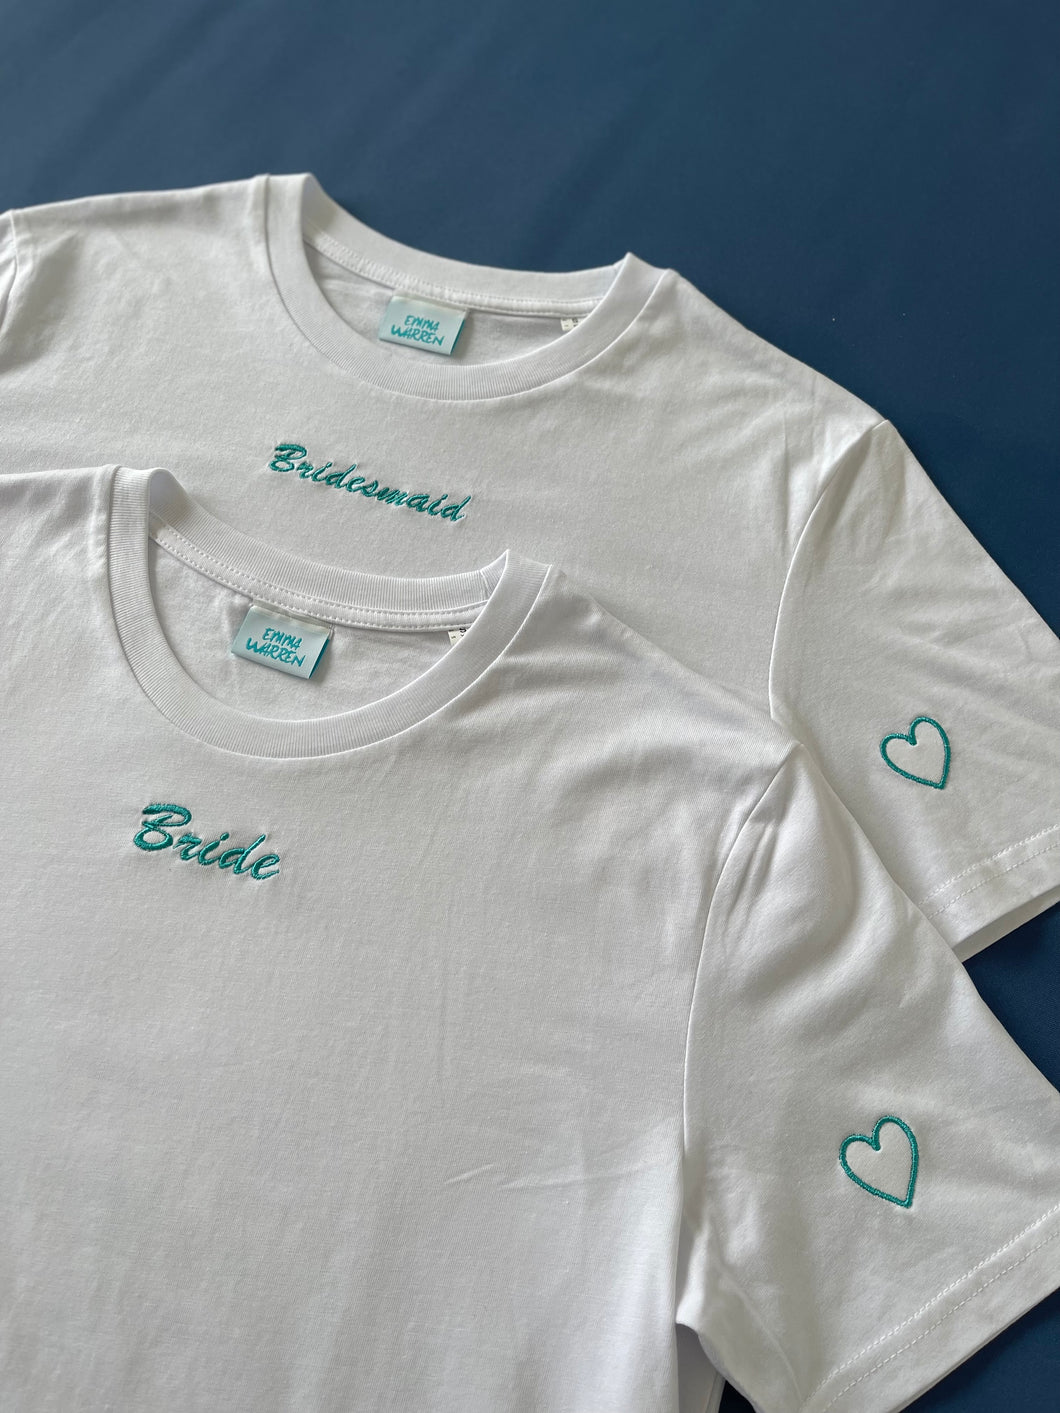 Wedding party t-shirt with heart sleeve